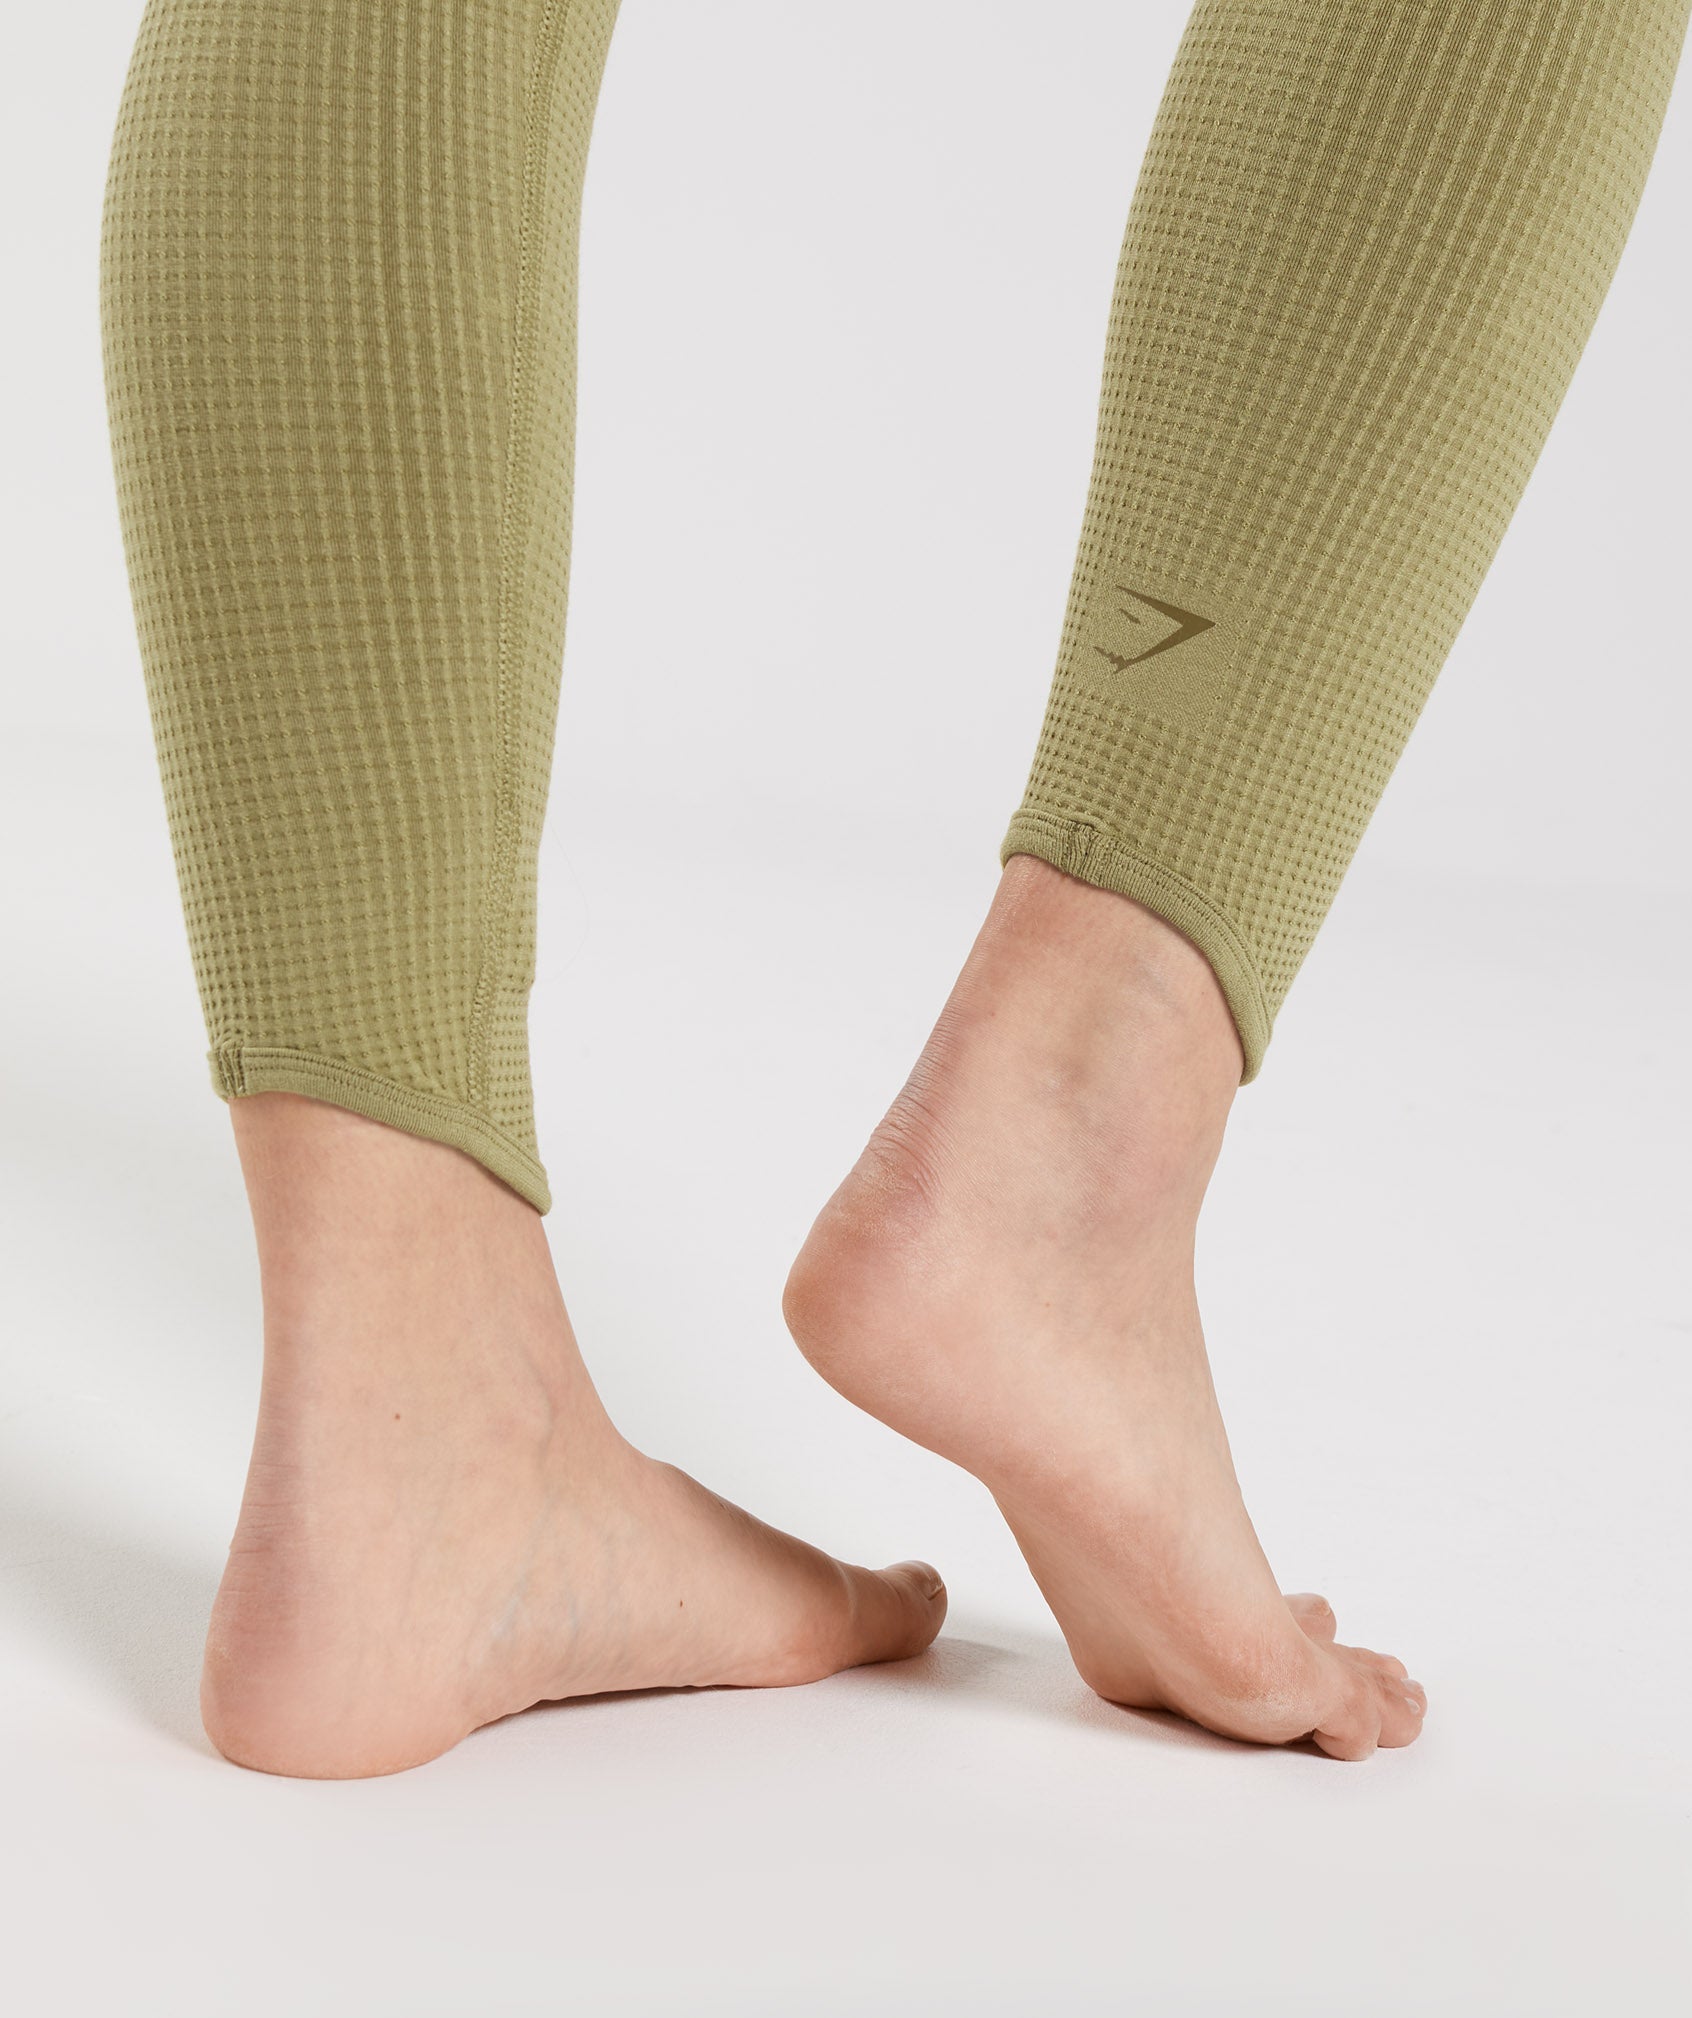 Pause Seamless Leggings in Griffin Green - view 6